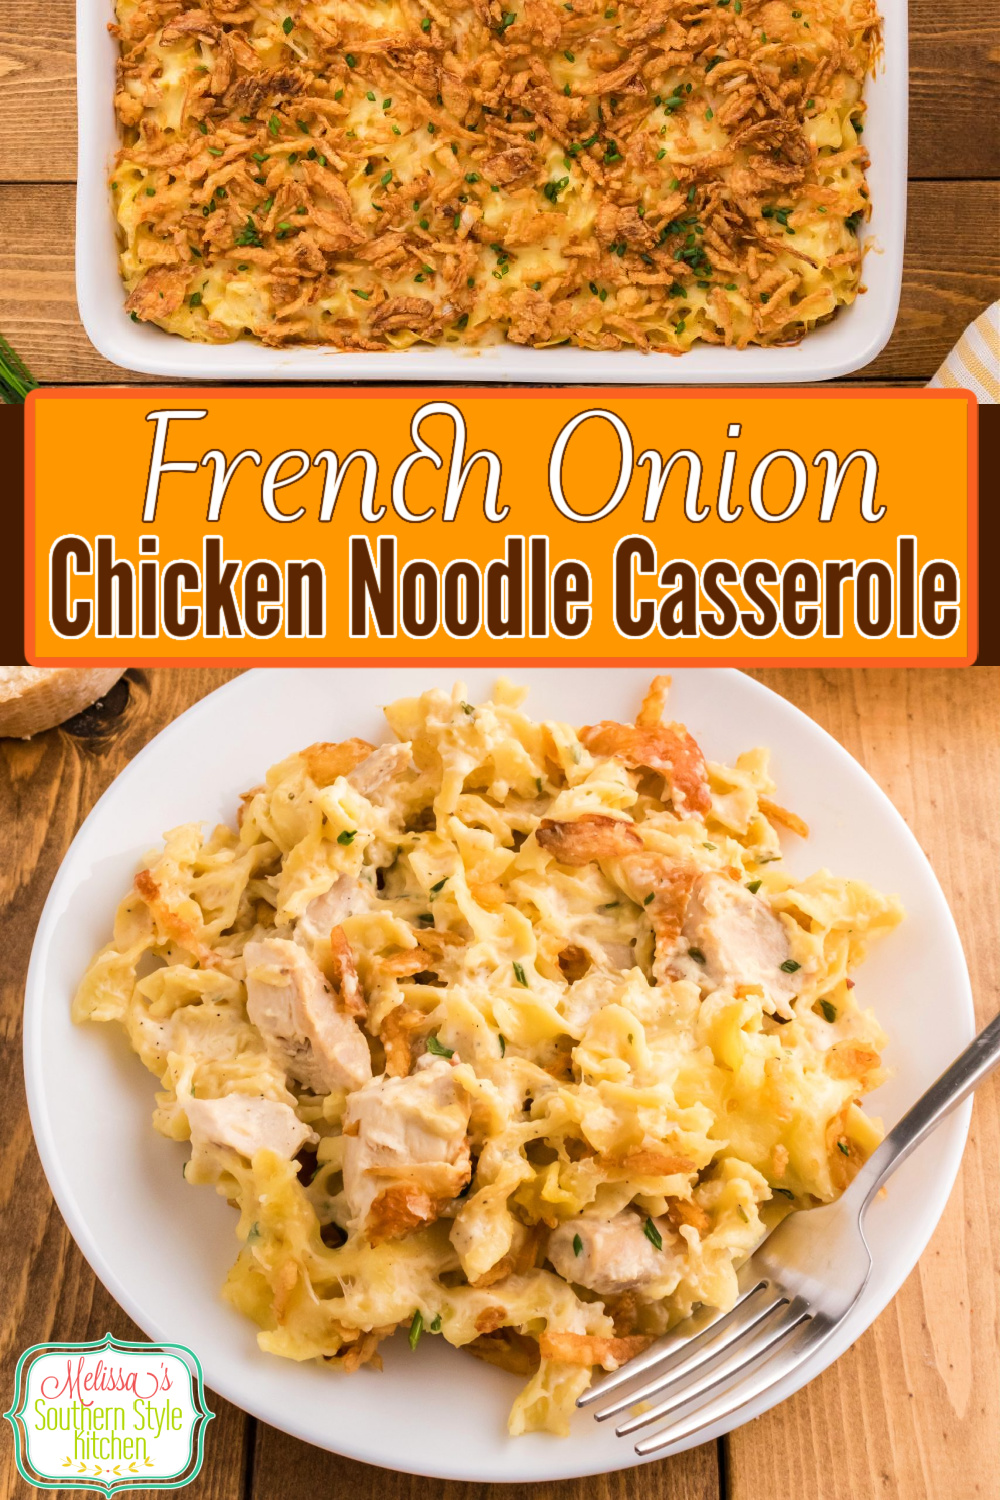 This easy French Onion Chicken Noodle Casserole will fill the hungry tummies at your table without breaking the bank #frenchonionchicken #chickencasseroles #chickennoodle #chickennoodlecasserole #casserolerecipes #frenchonion #easychickenbreastrecipes #casseroles via @melissasssk